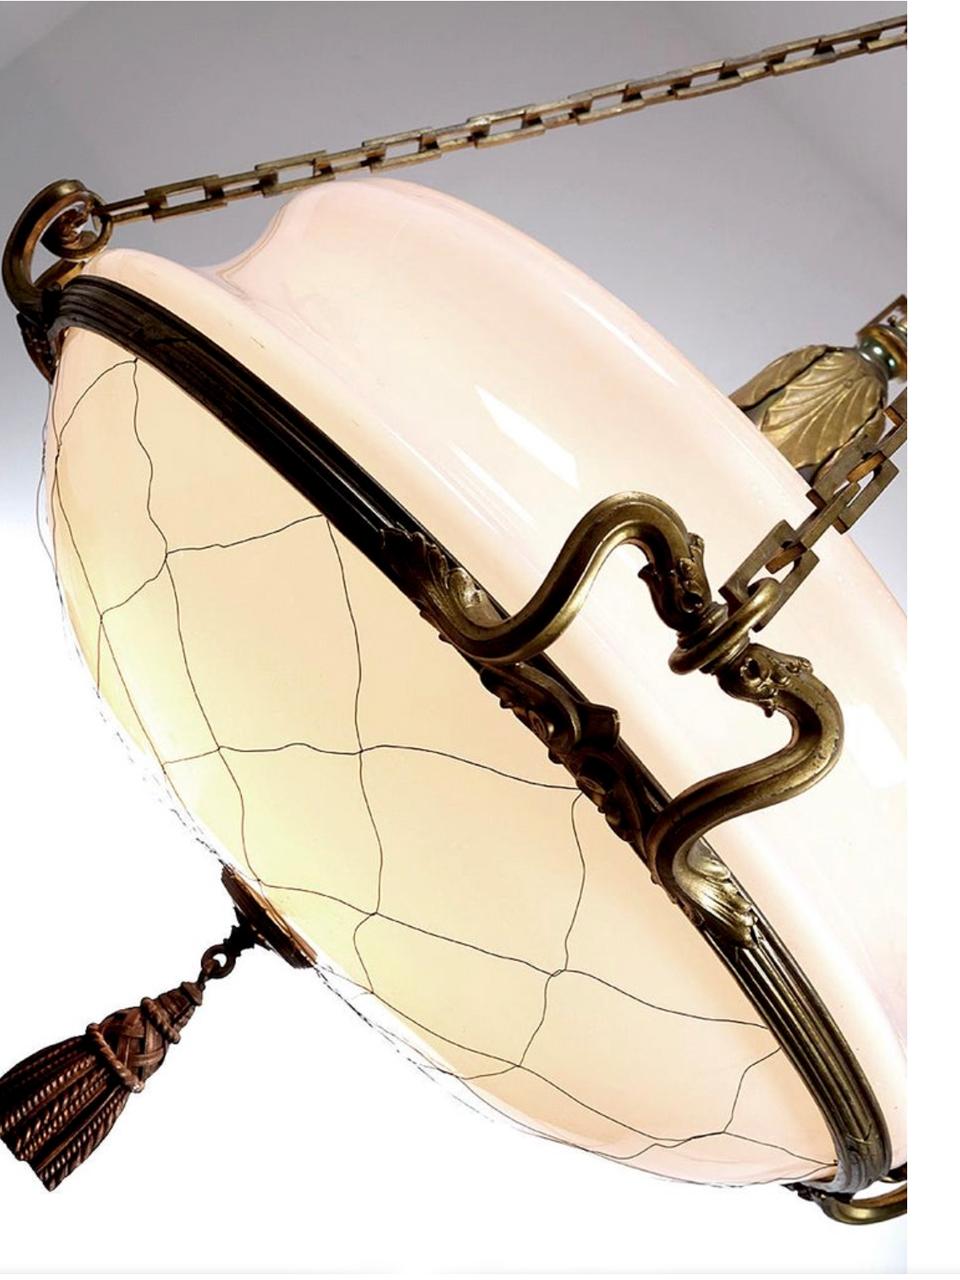 These lamps were once gas and later electrified. We were lucky to acquire a nice collection of these impressive fixtures. It’s something that will not happen again. Each lamp is bronze with a heavy 26 inch milk glass shade and weigh about 50 pounds.